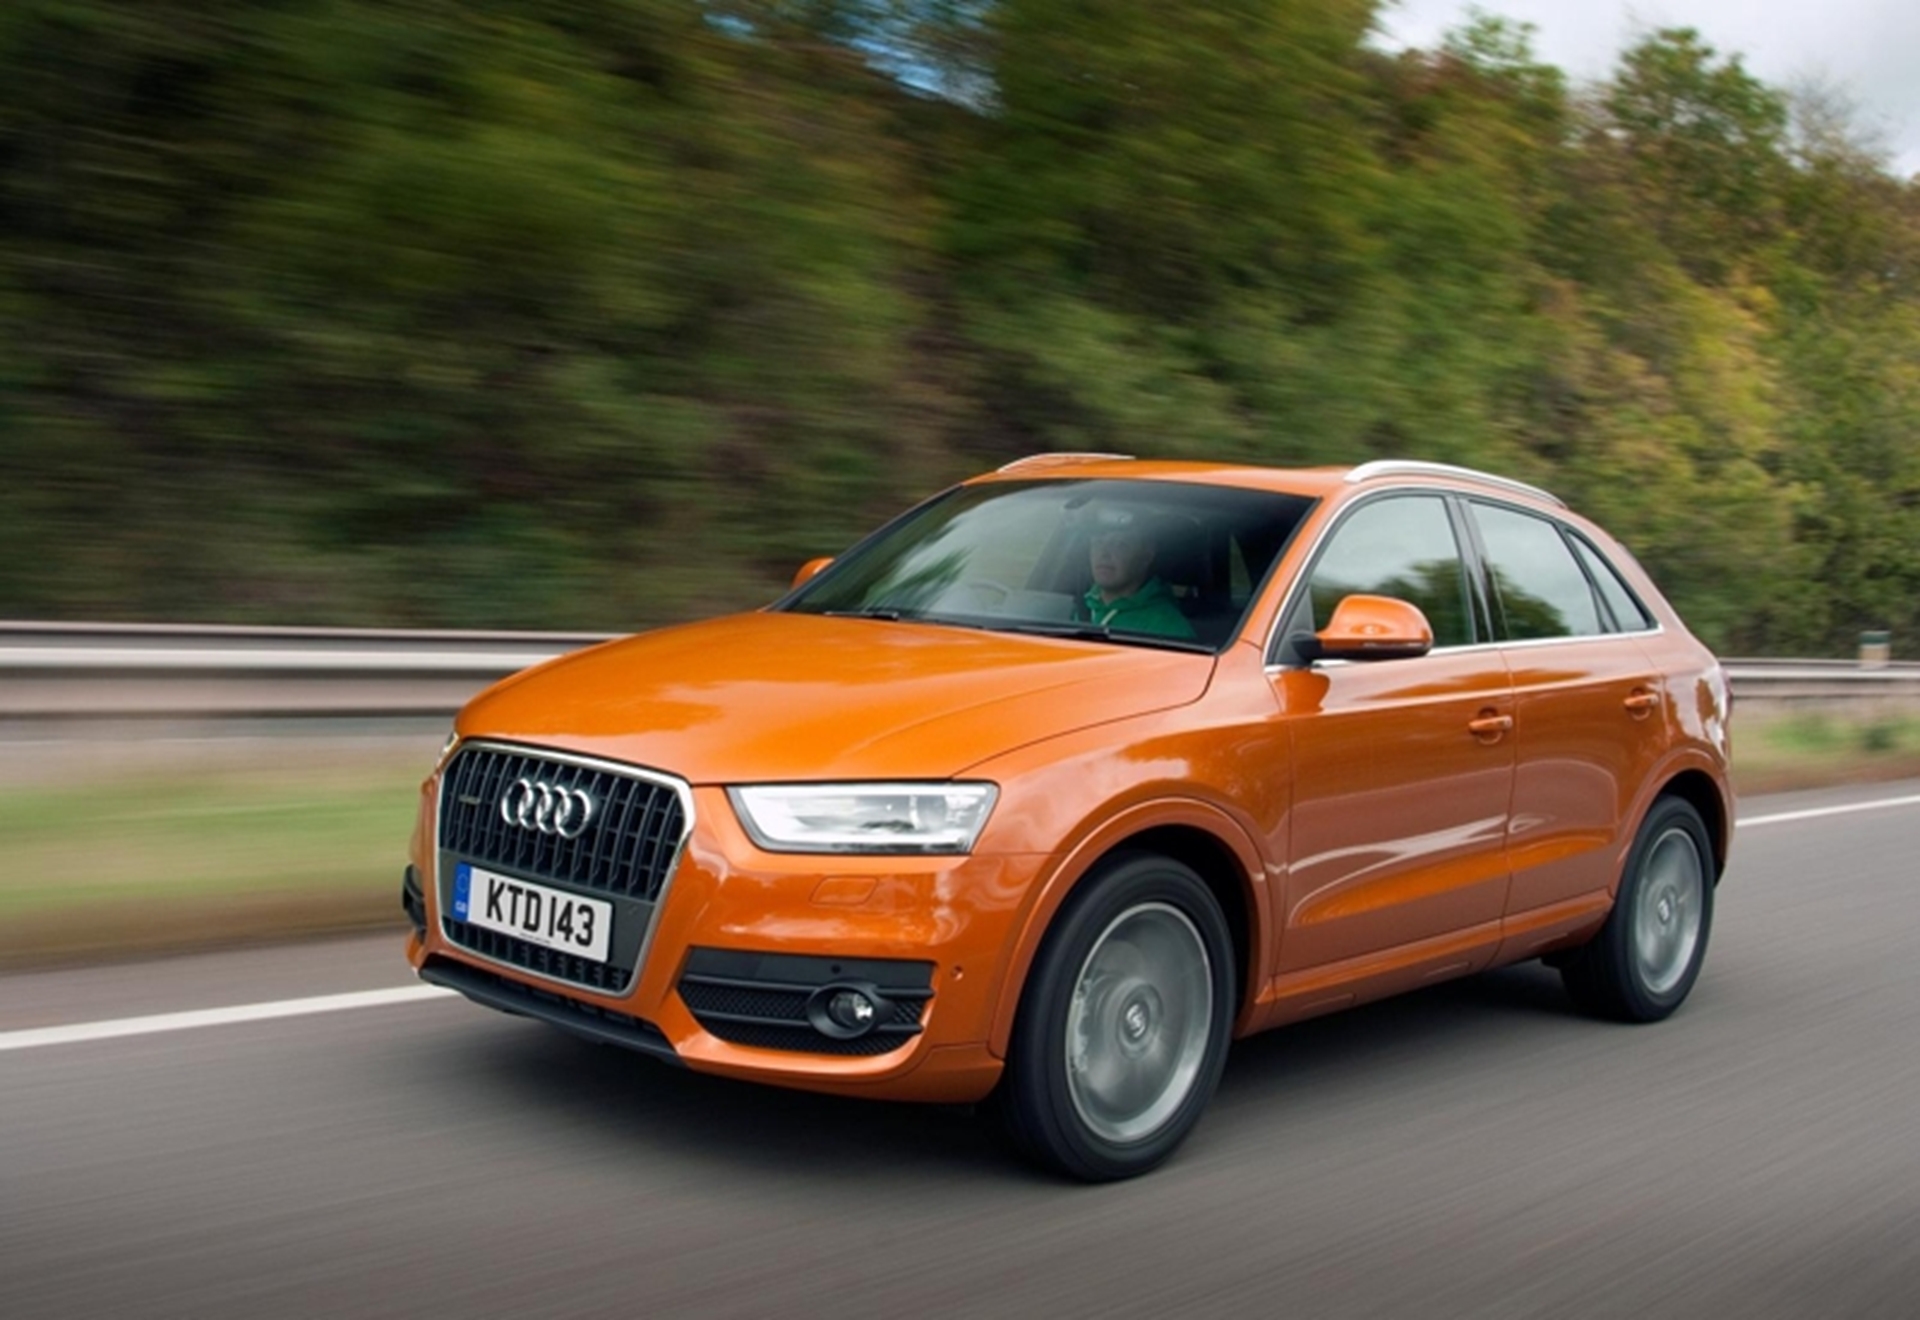 AUDI Q3 IS TOP OF THE CLASS IN 2011 EURO NCAP CRASH TESTS